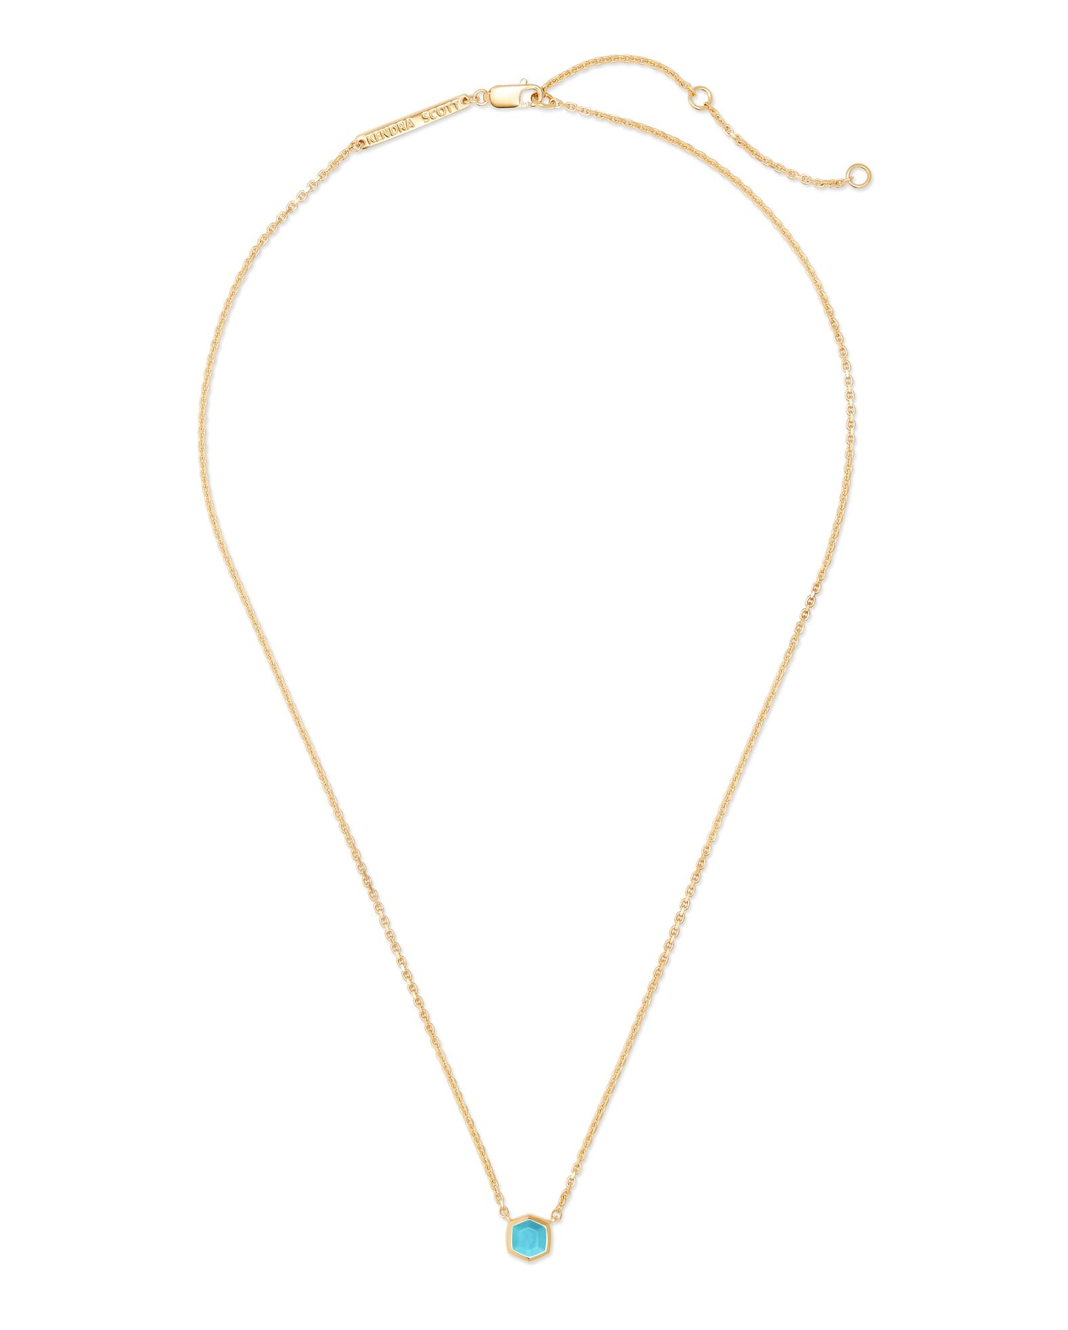 Davie Necklace in 18k Gold Vermeil Necklace in Turquoise | December